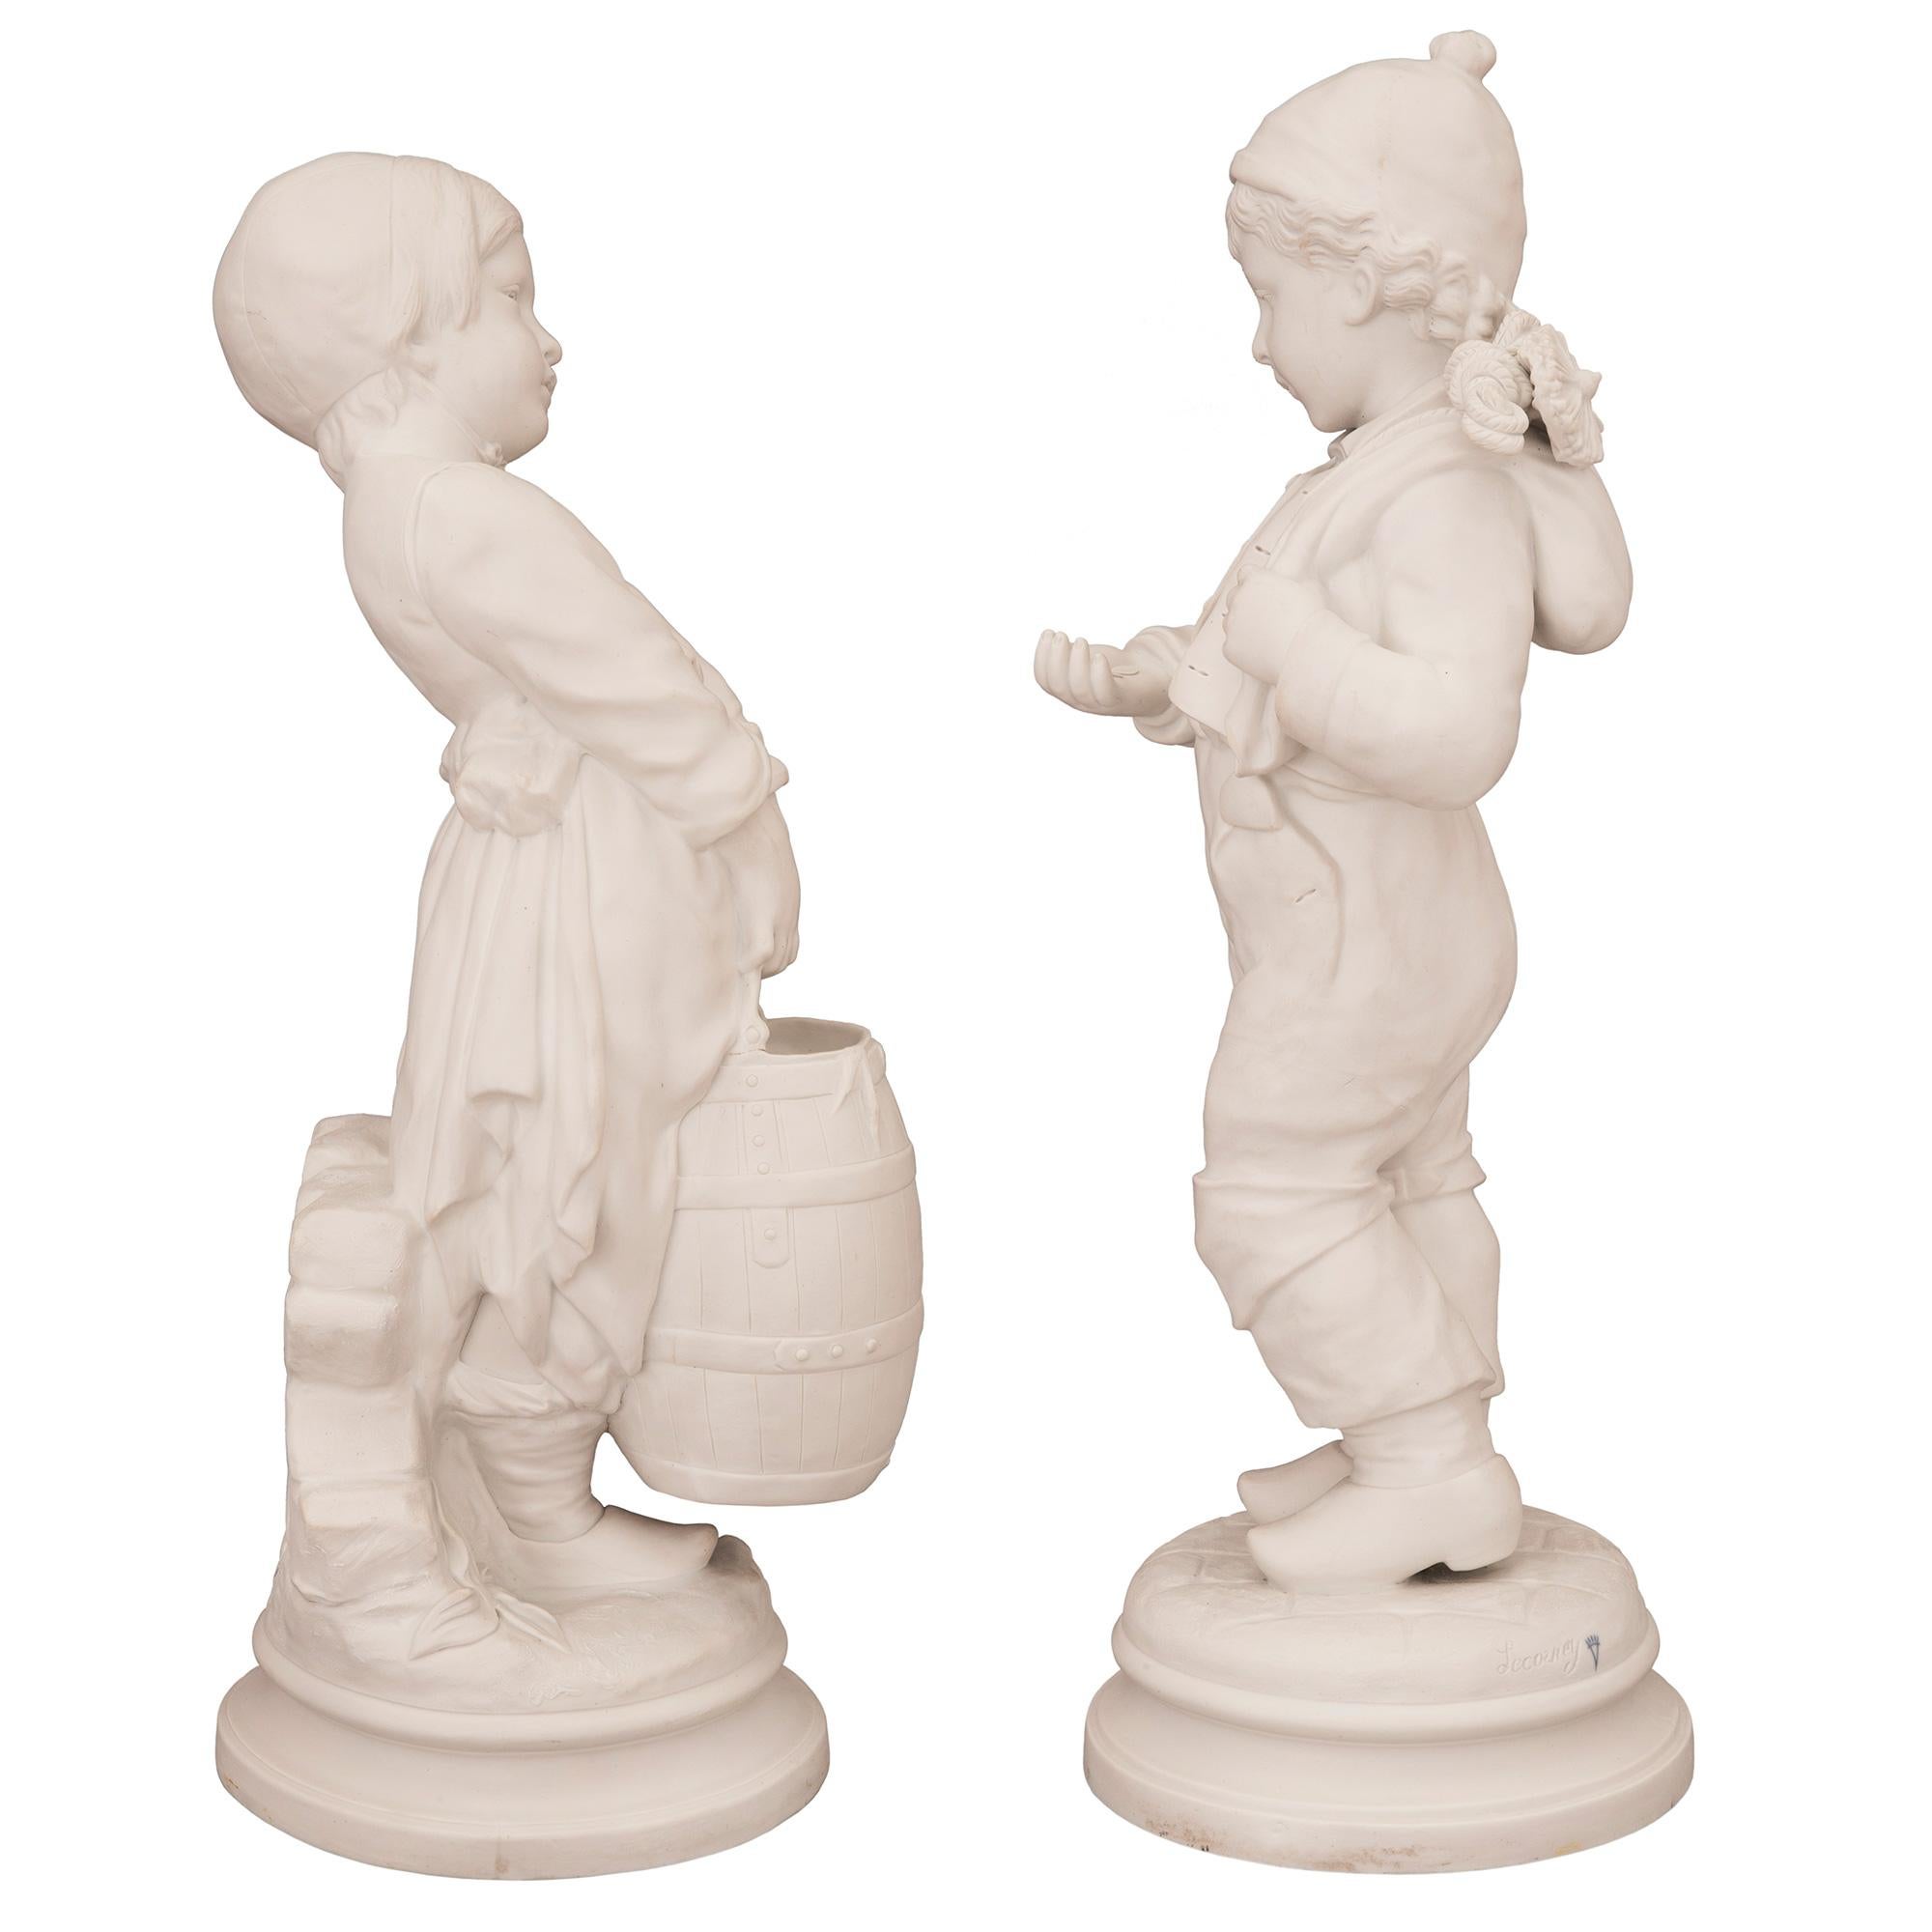 An incredibly charming pair of French 19th century Louis XVI st. Biscuit de Sèvres porcelain statues of a boy and a girl. Each statue is raised by an elegant circular mottled base with a fine ground design. To the left is a beautiful young girl